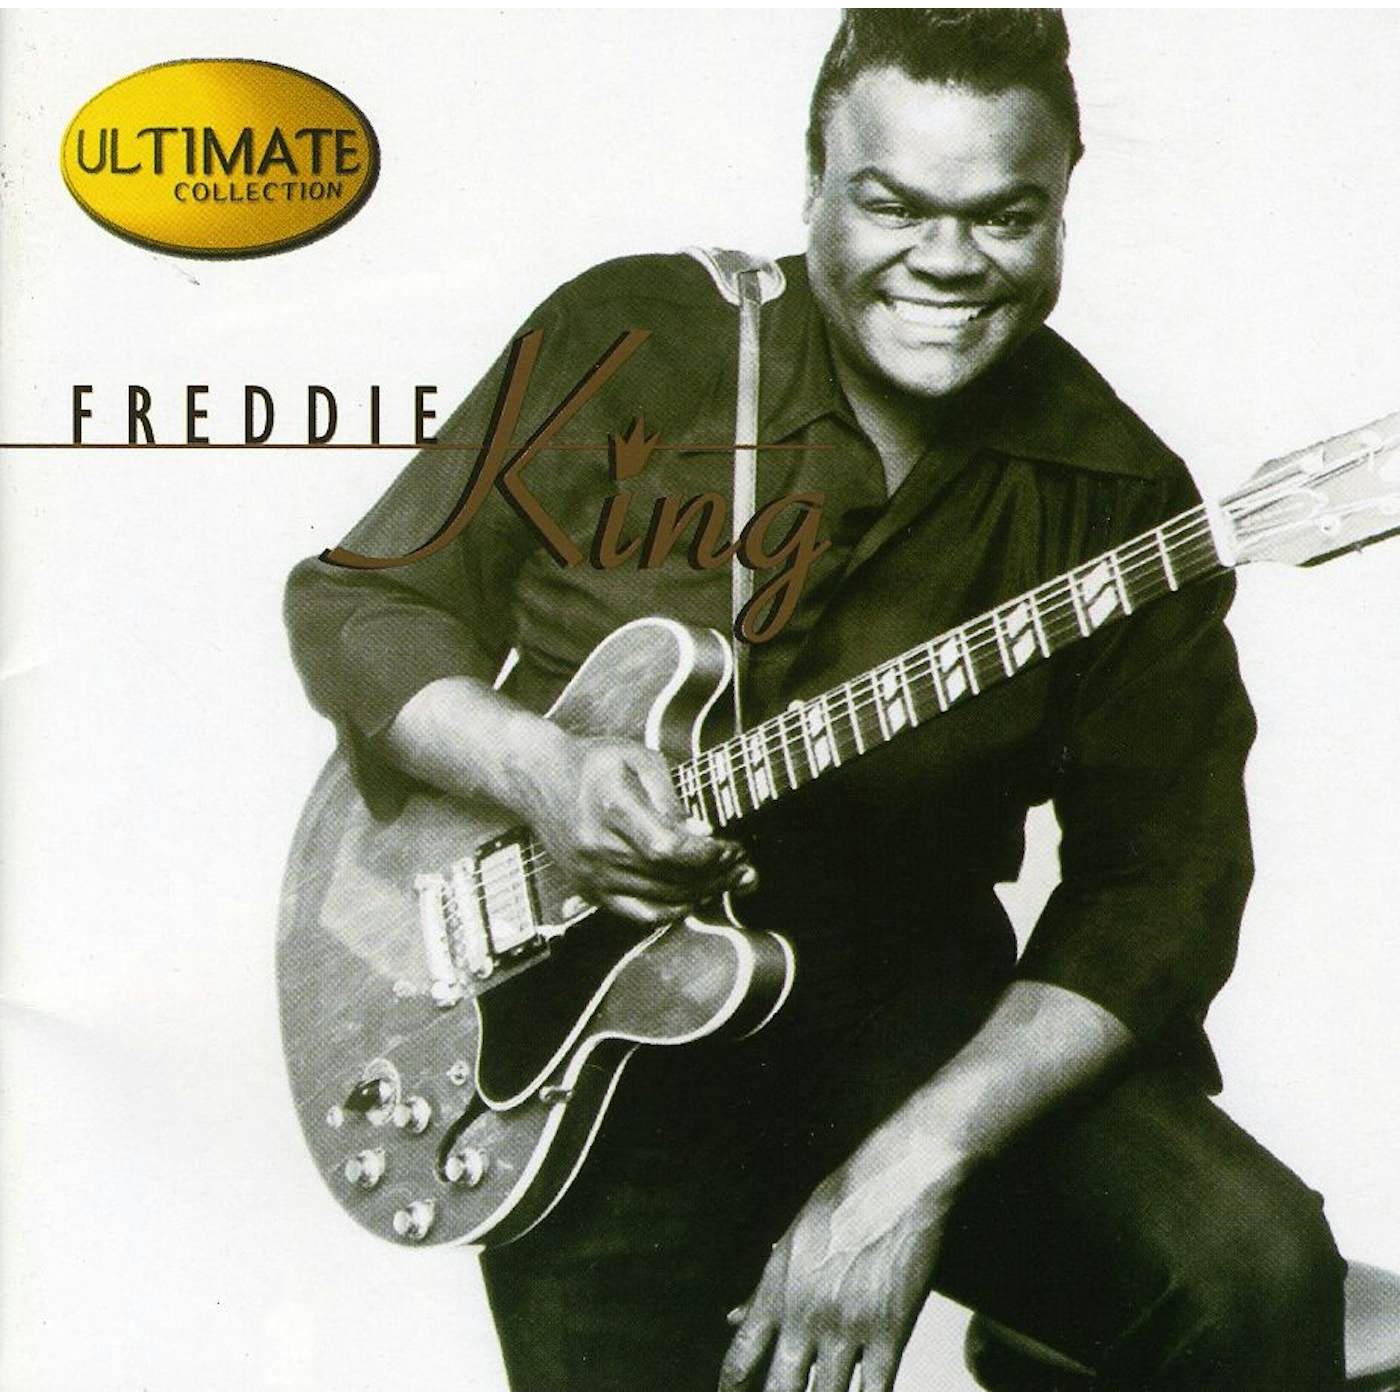 Freddie King ULTIMATE COLLECTION CD